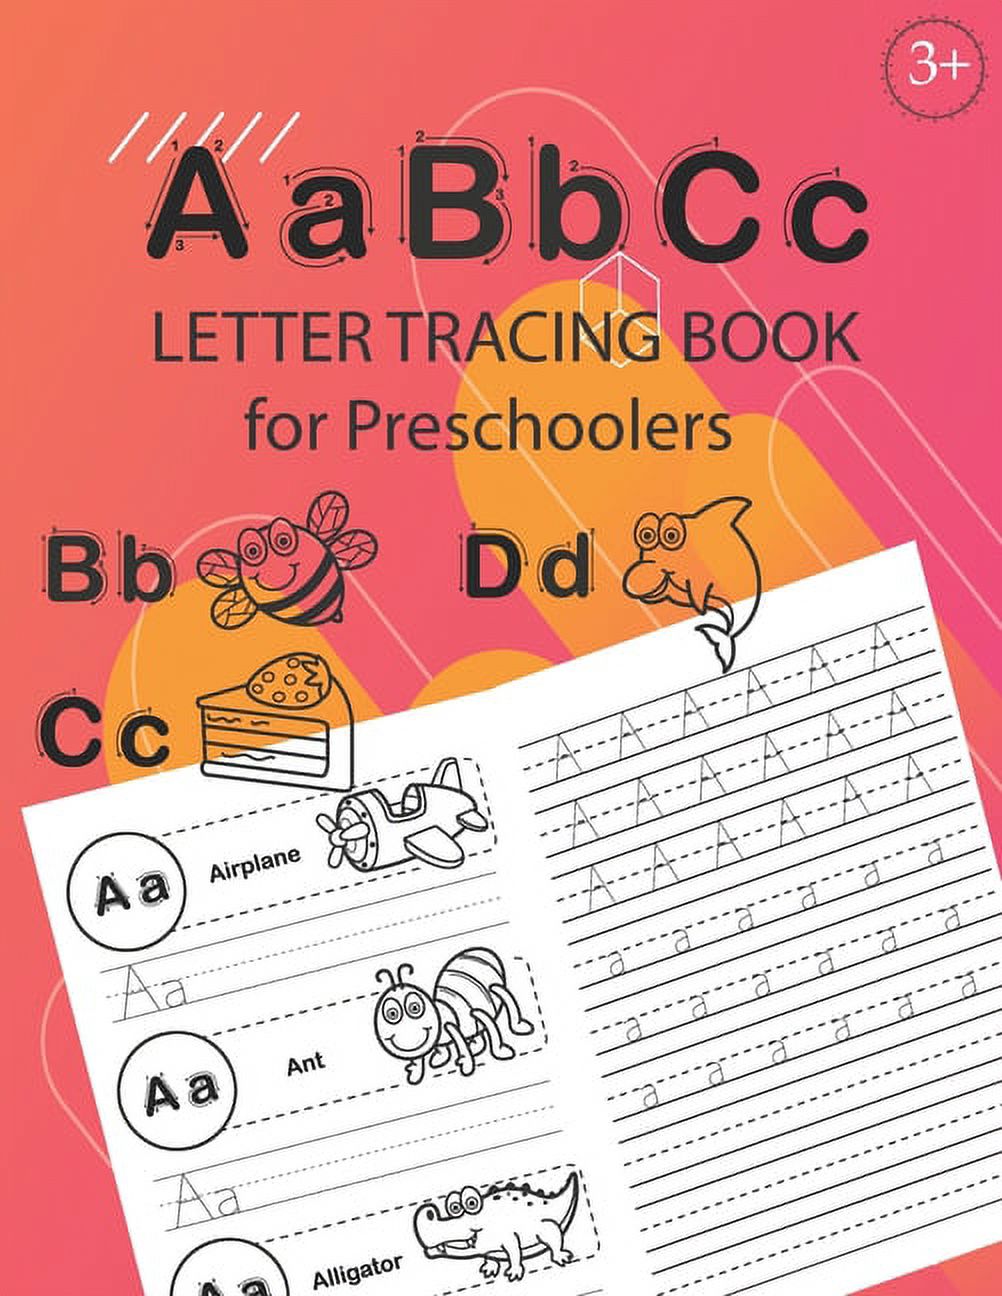 ABC Letter Tracing Book for Preschoolers : Alphabet Tracing Workbook for  Preschoolers / Pre K and Kindergarten Letter Tracing Book ages 3-5 / Letter  Tracing for Preschoolers 100 pages (52 pages letter